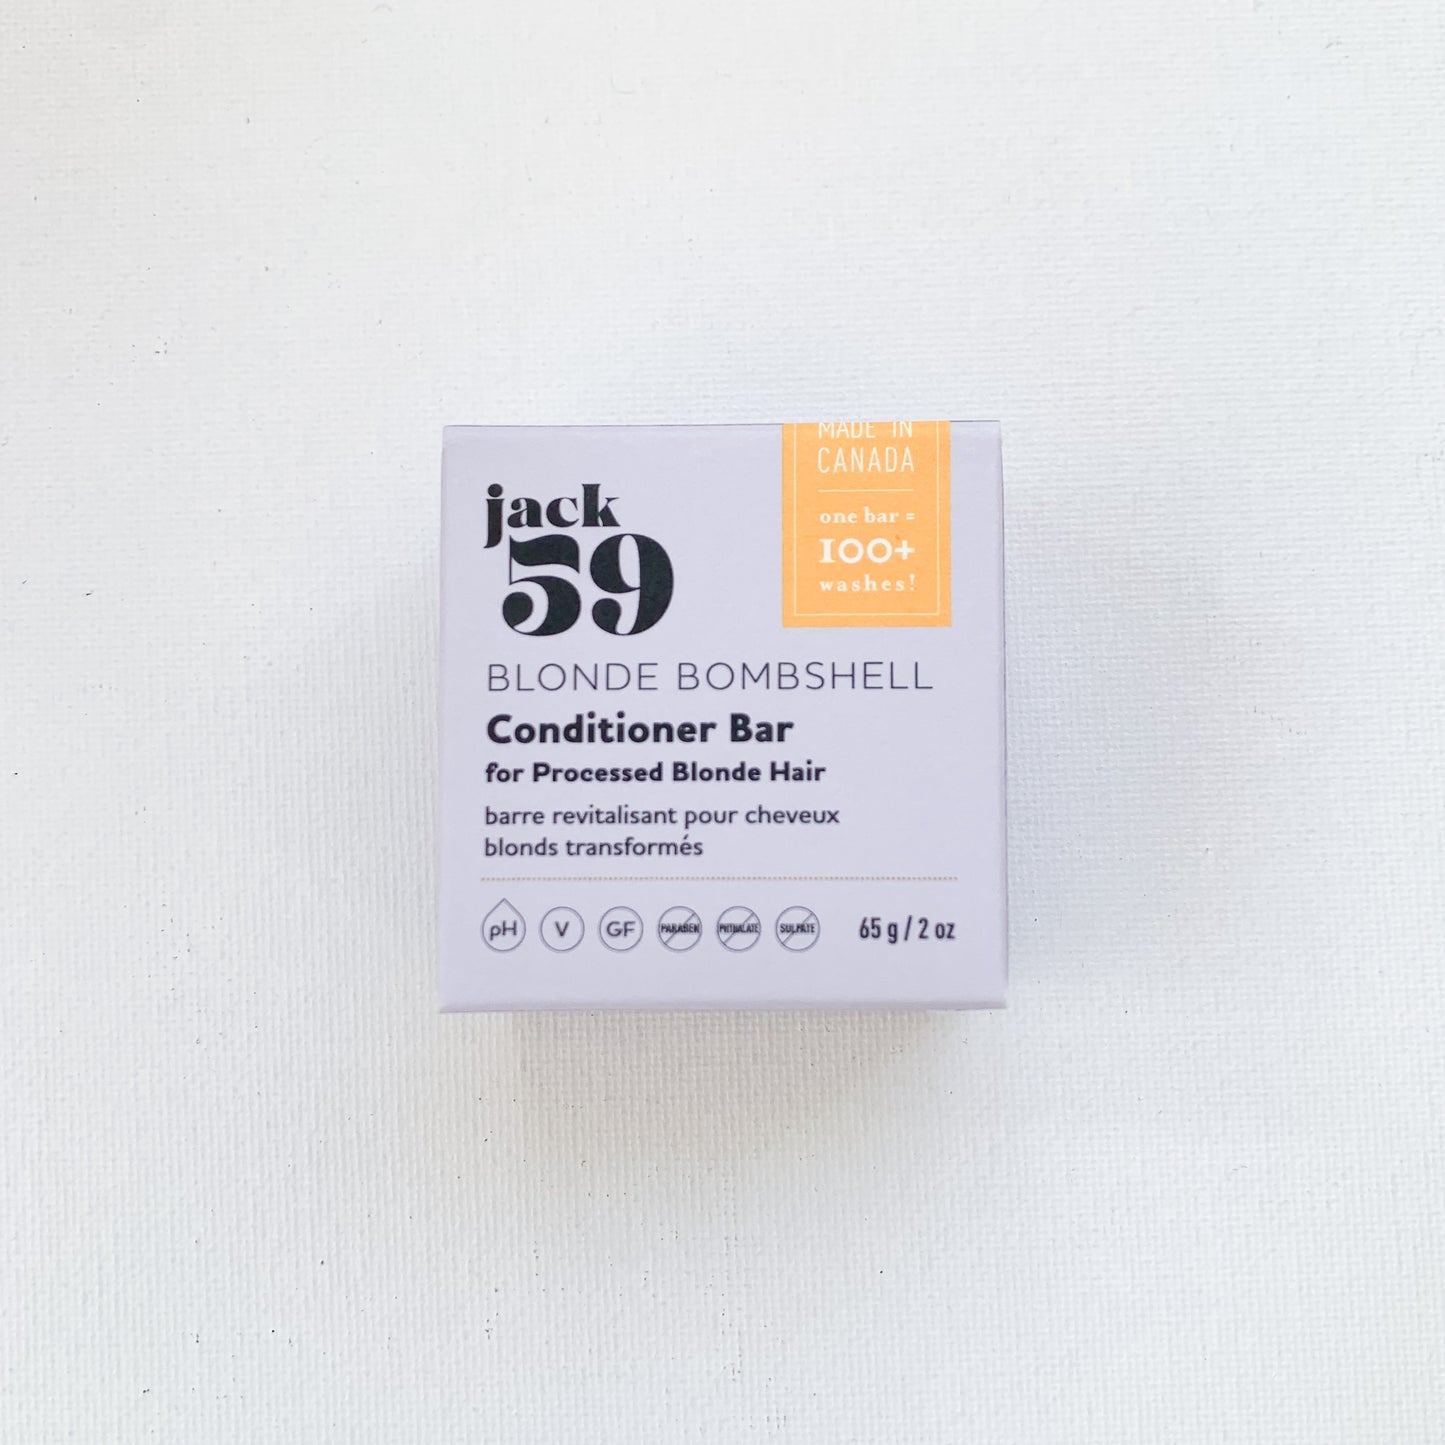 Blonde Bombshell Conditioner bar packaged in a pastel blue box with the text "Jack59 Blonde Bombshell conditioner bar for processed blonde hair'